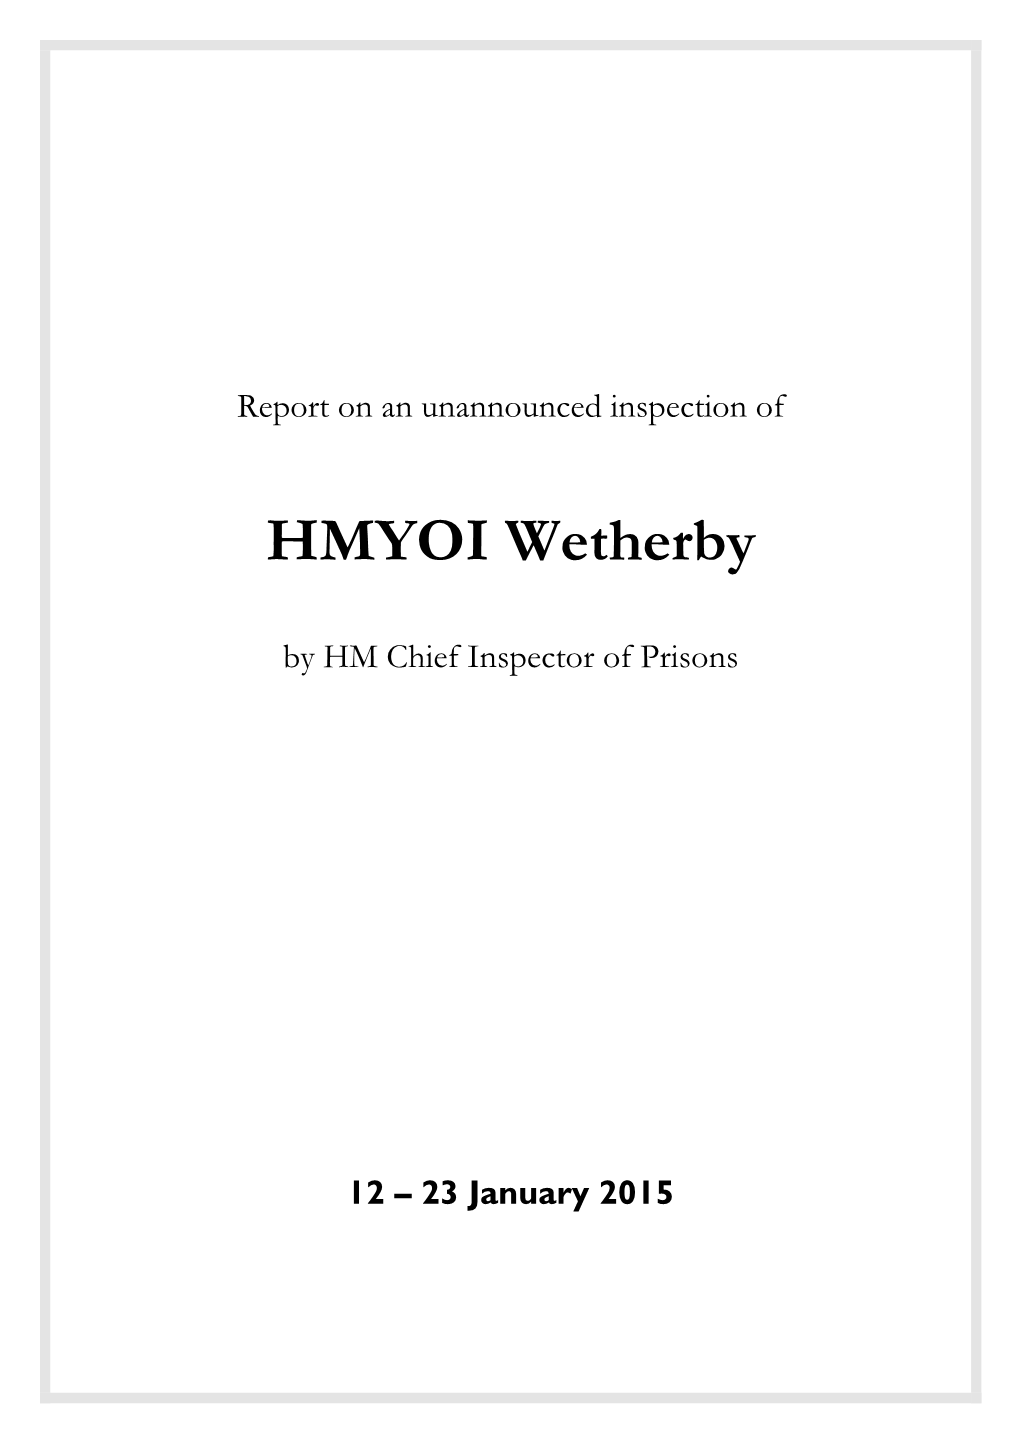 Report on an Unannounced Inspection of HMYOI Wetherby